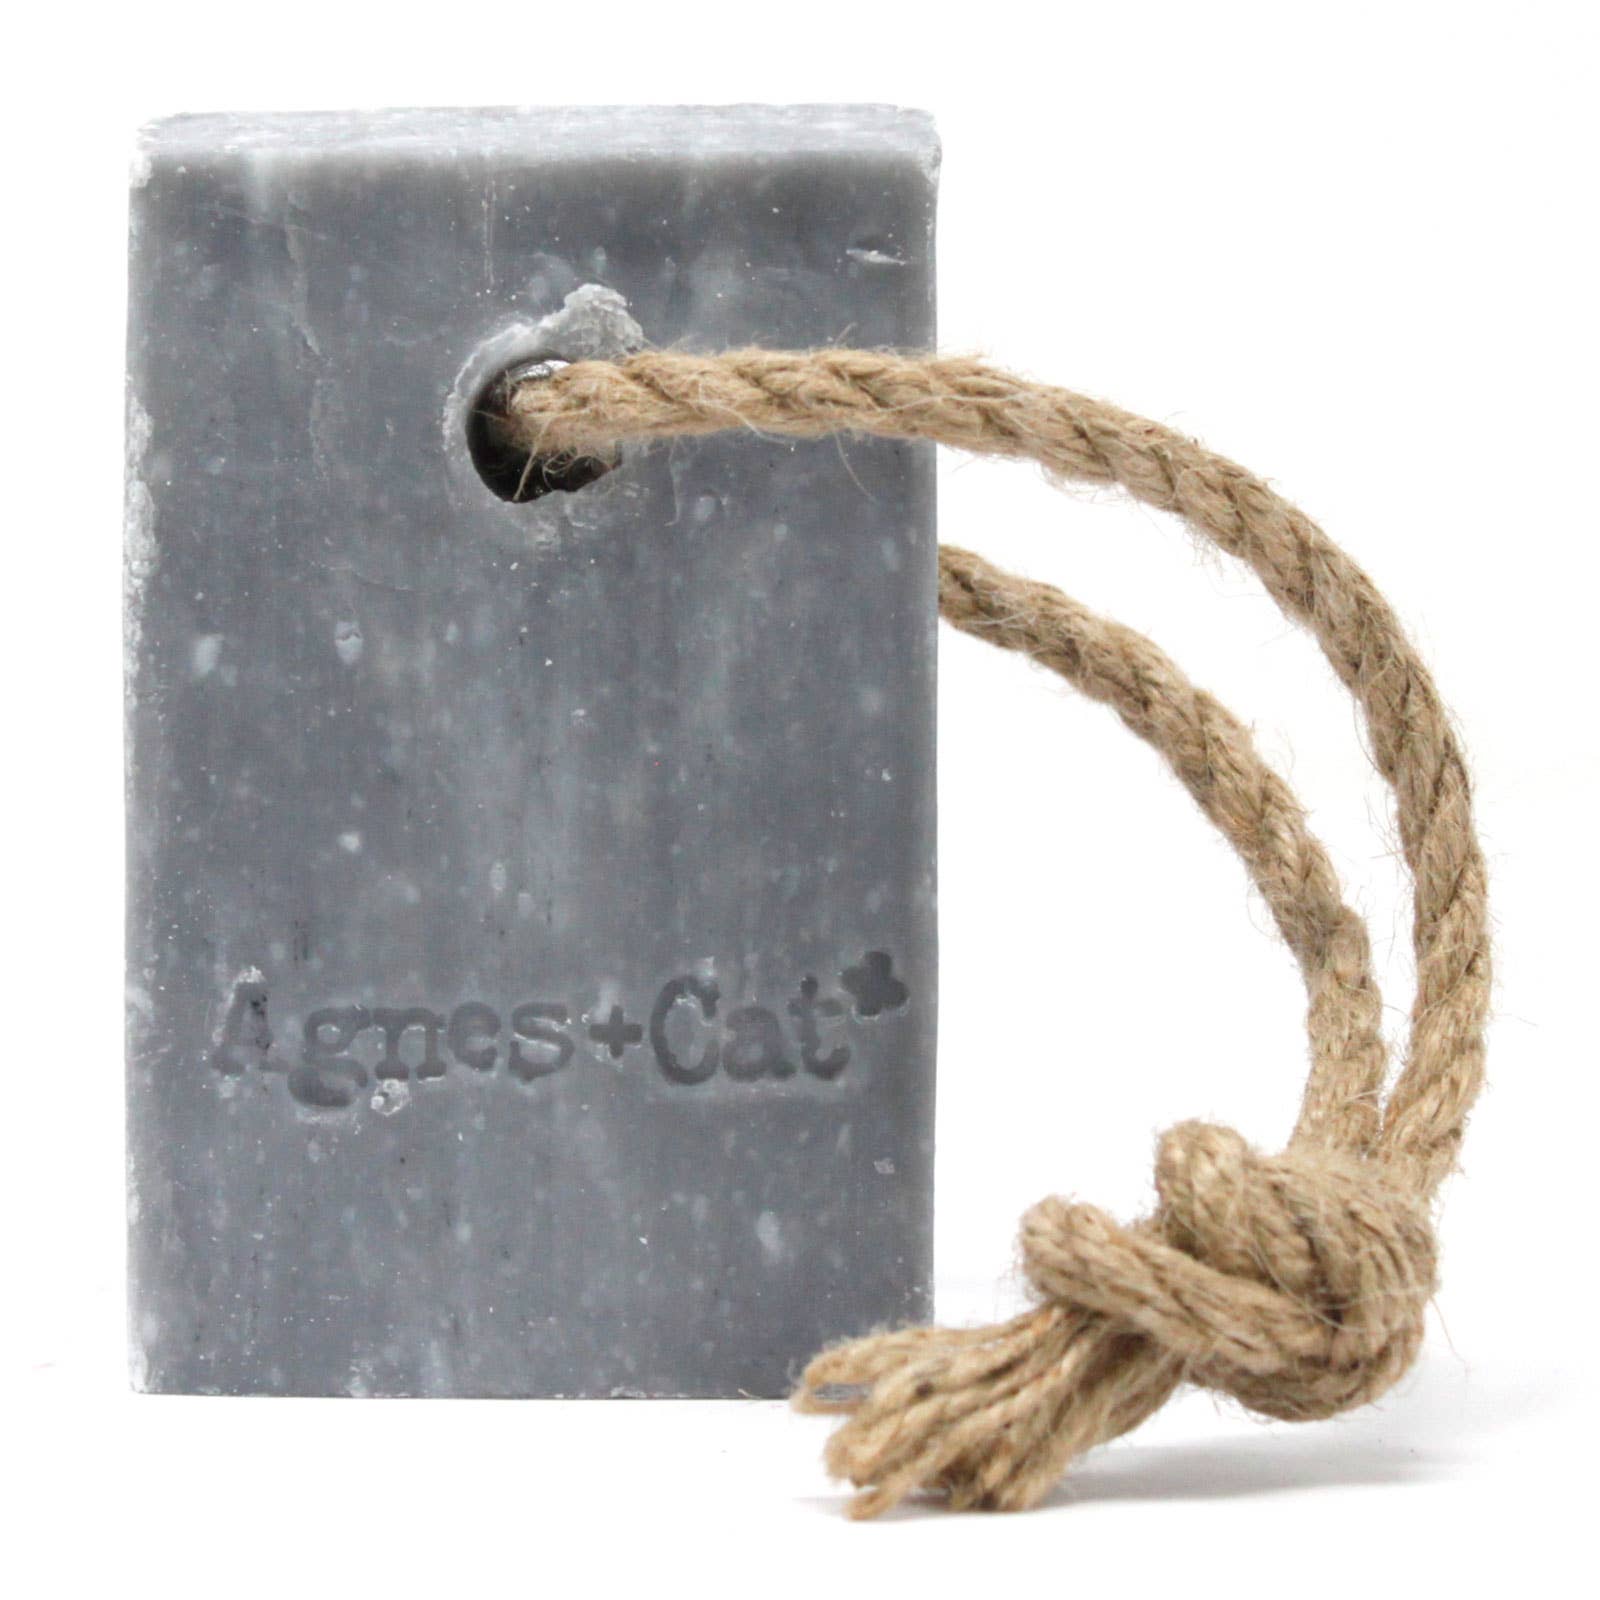 150g Soap On A Rope - Windermere